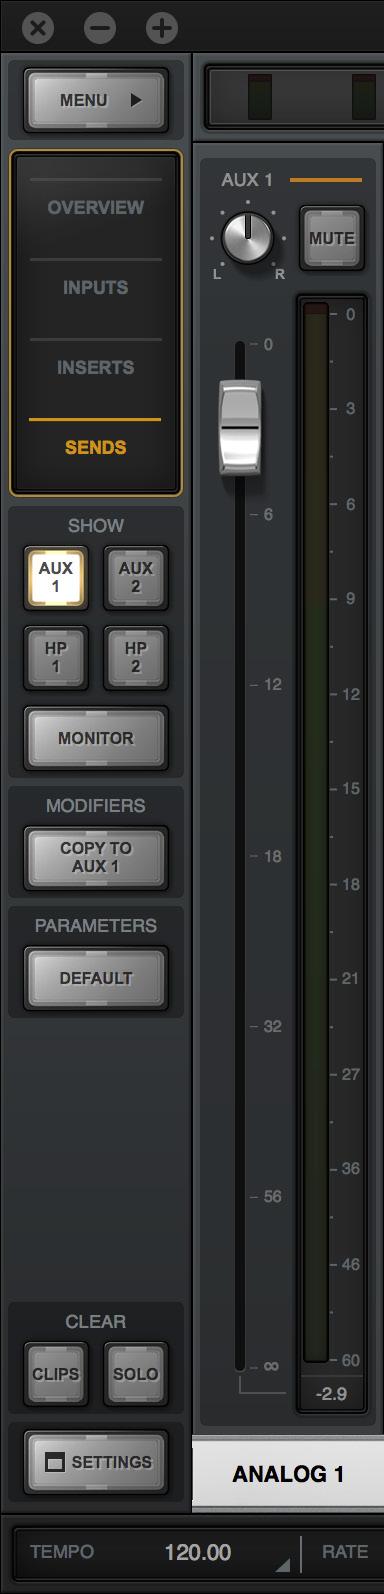 The displayed mixes are determined by the state of the send and monitor SHOW switches in the Sends View column. The mix is visible when its switch is engaged (lit).